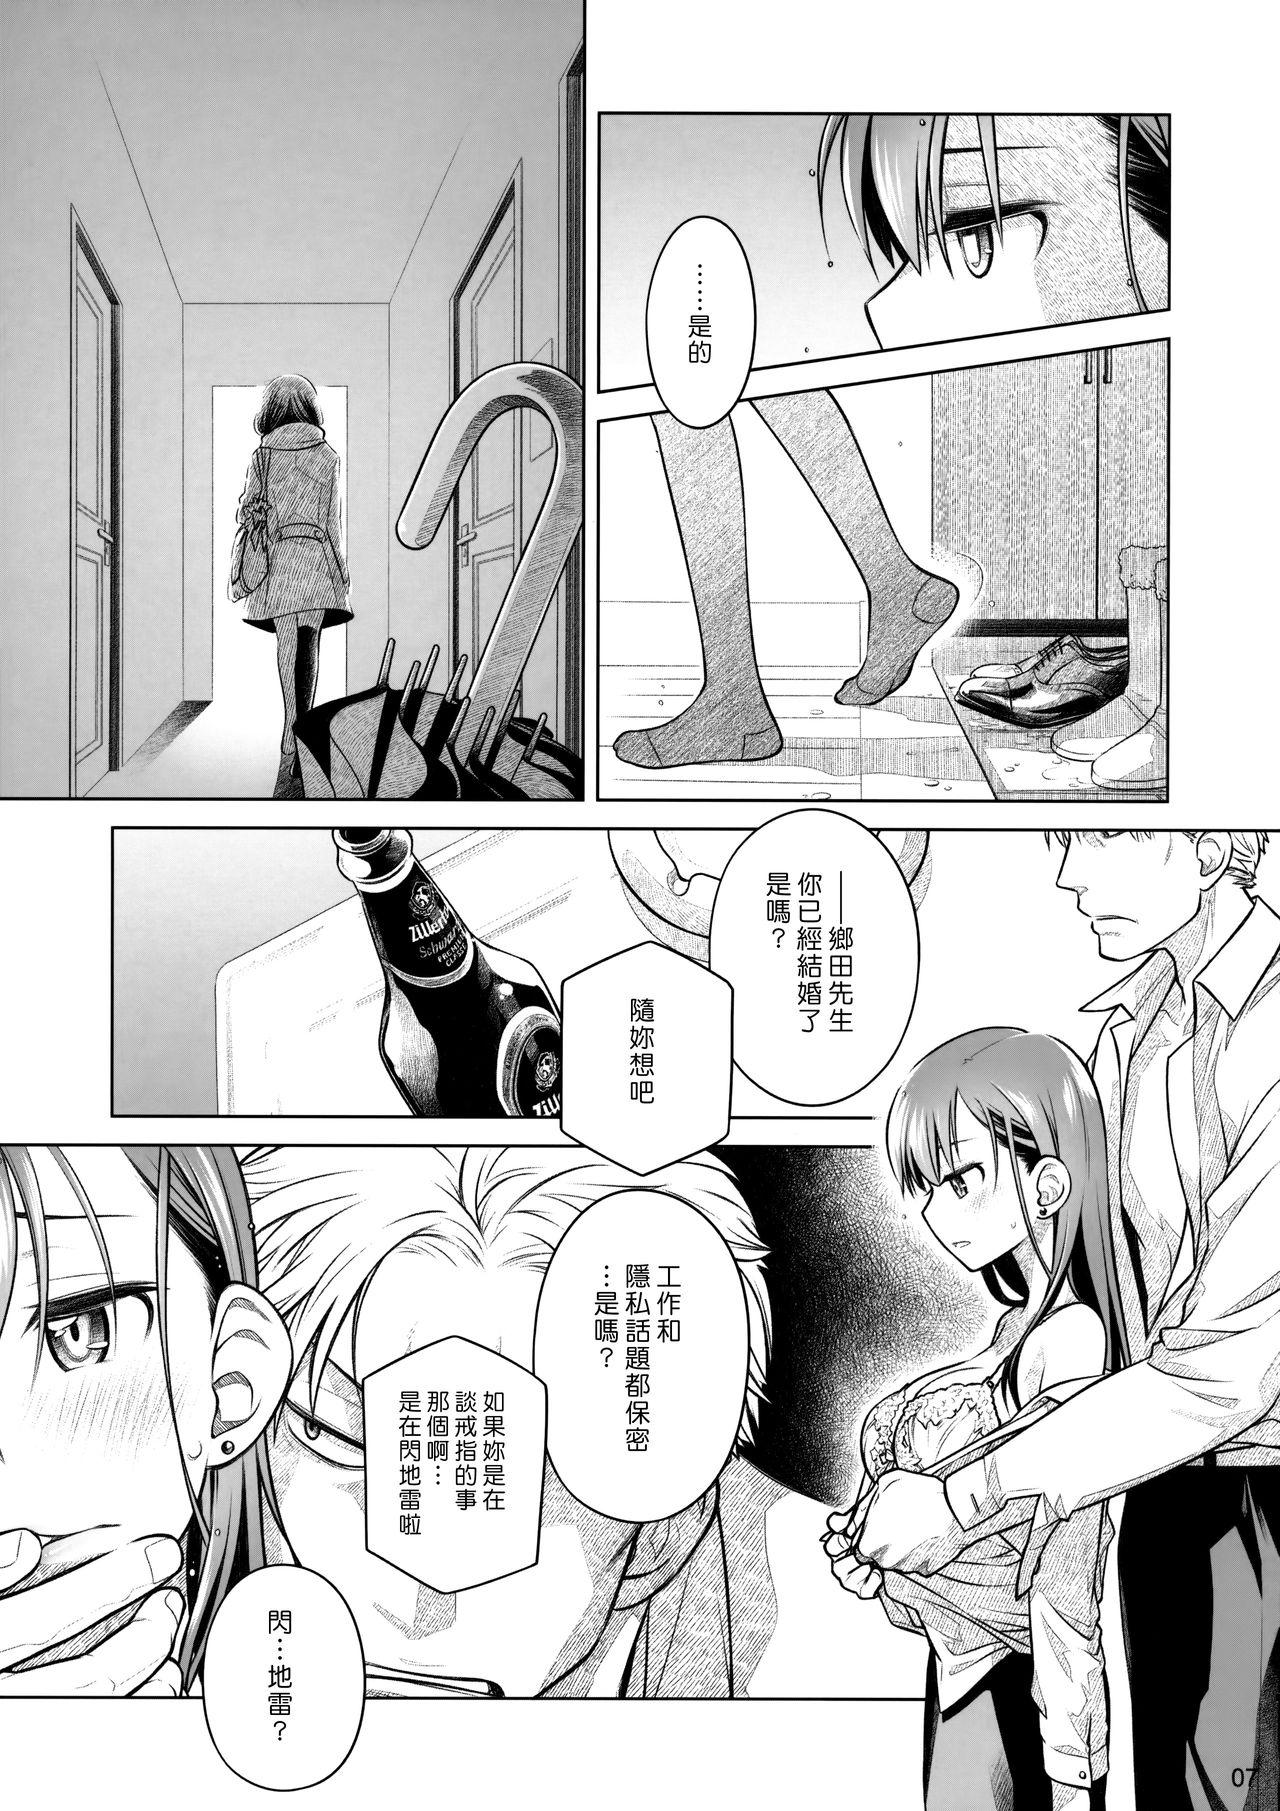 Double Stay by Me Zenjitsutan Fragile S - Stay by me "Prequel" Humiliation - Page 6